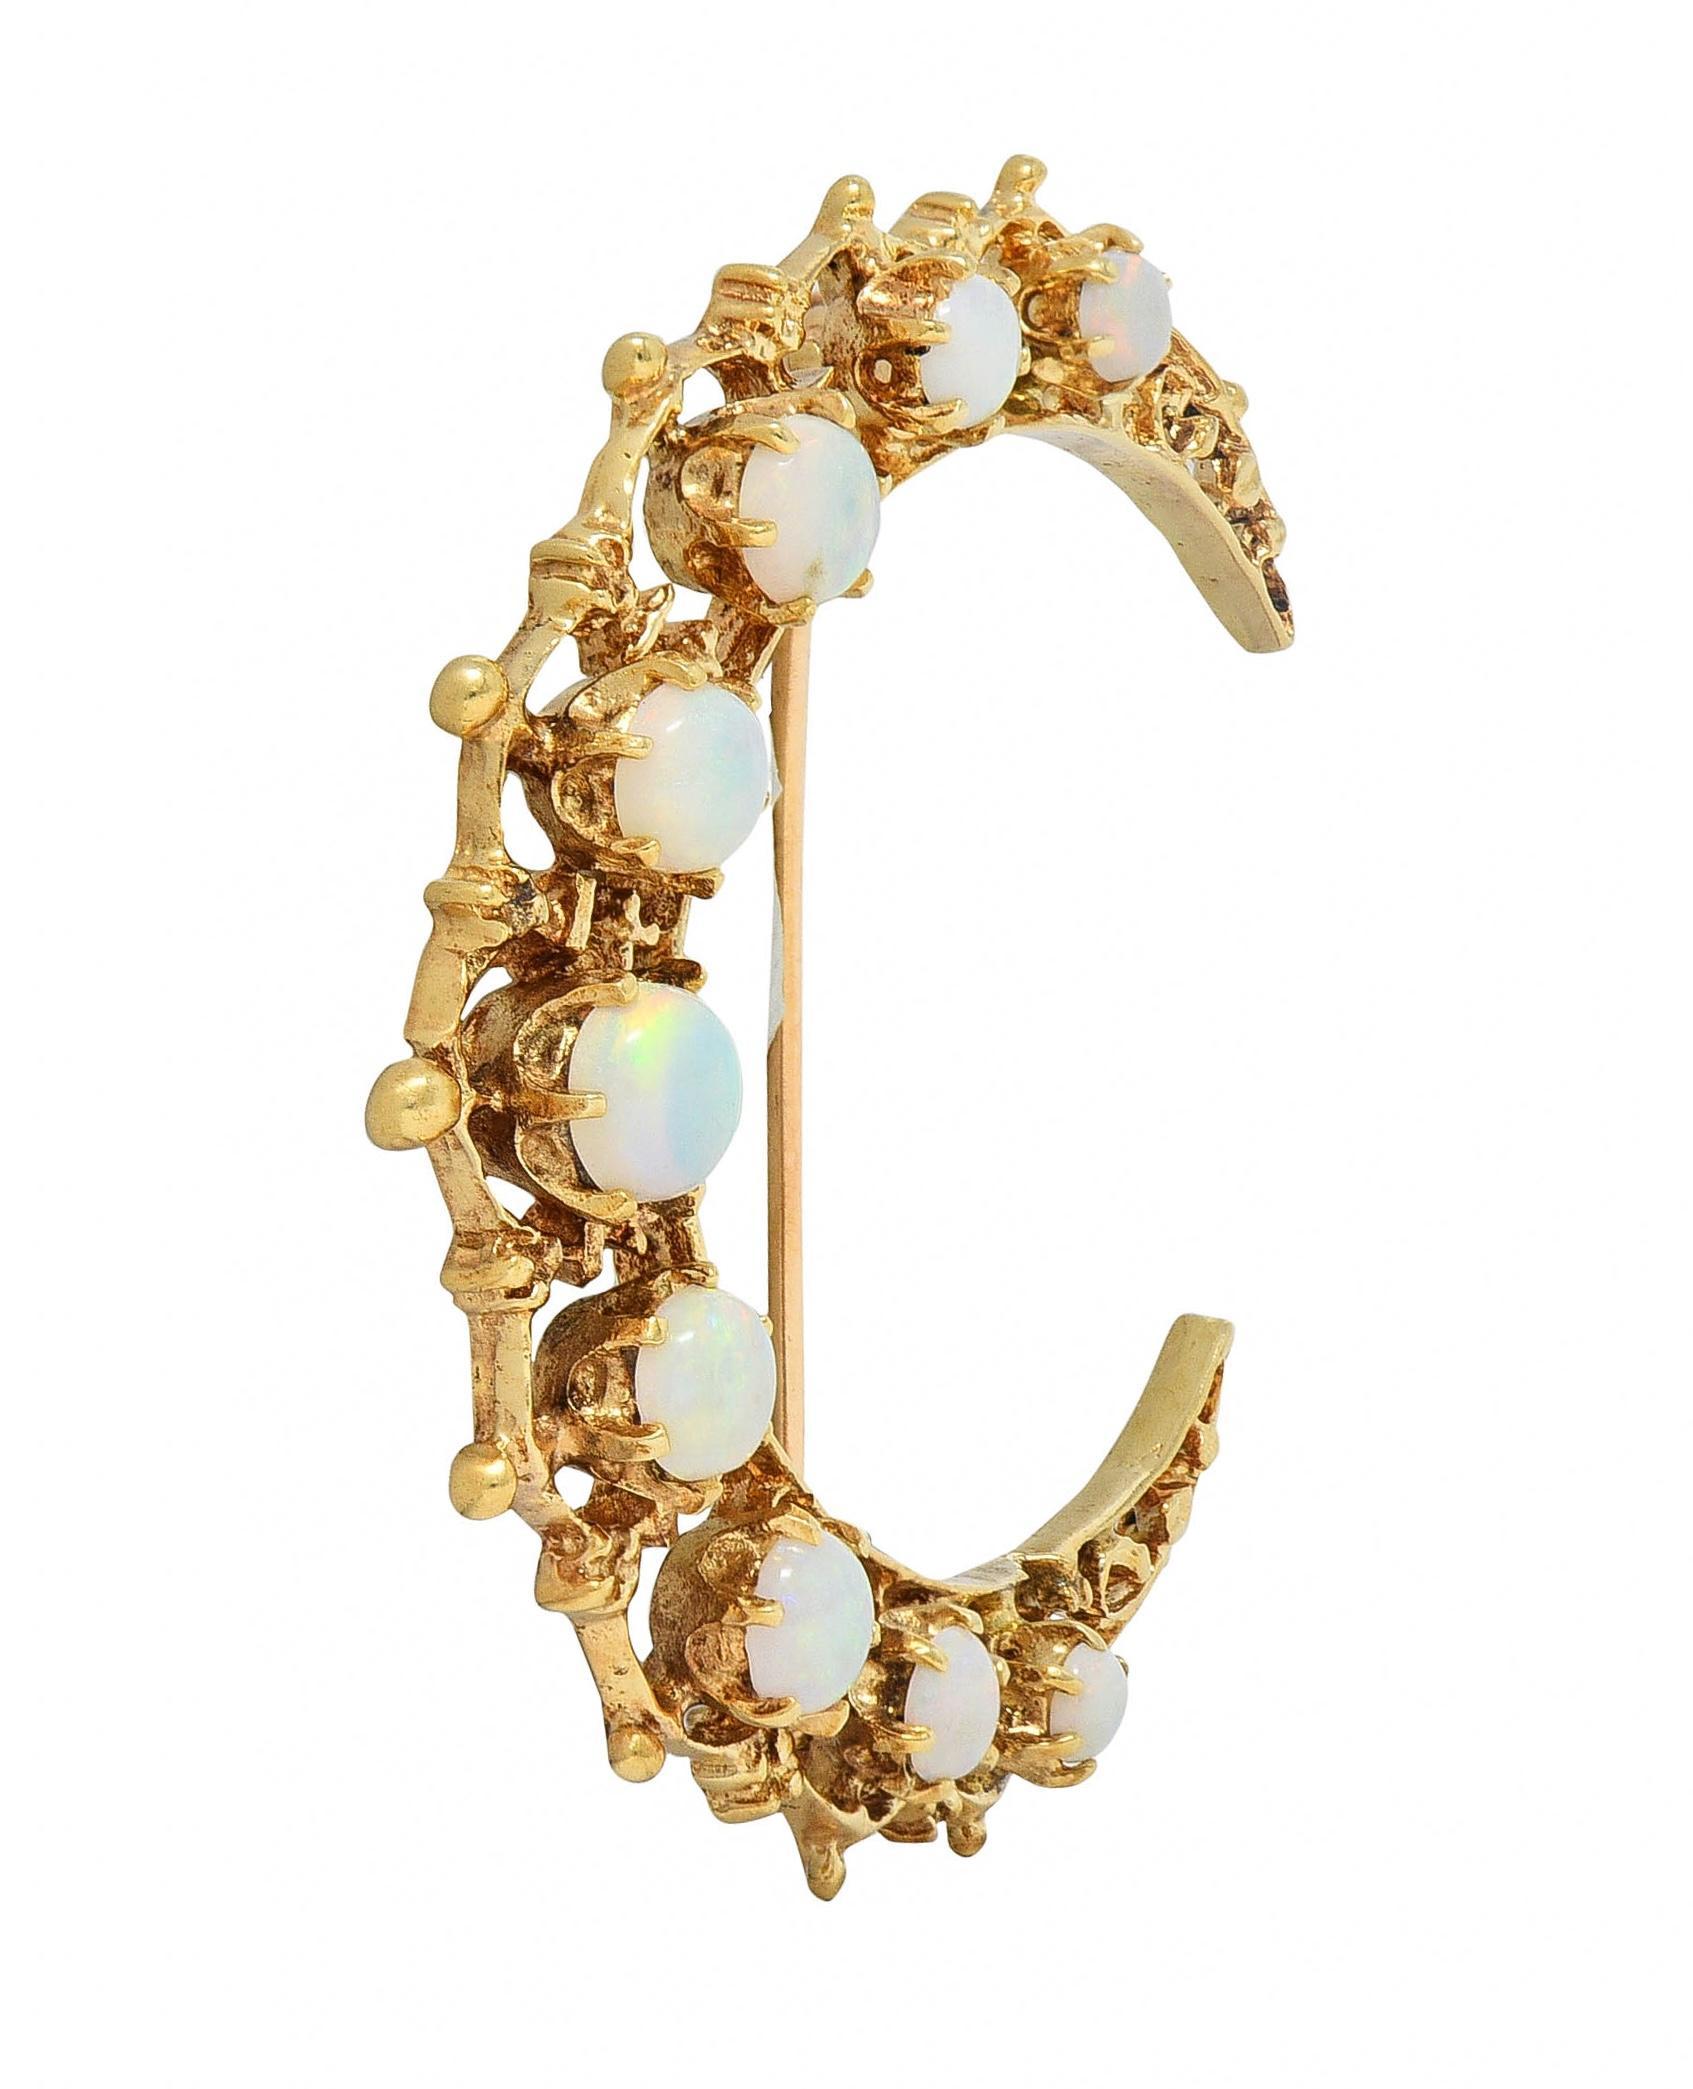 Designed as an ornately pierced scroll motif crescent-shaped form 
Featuring round-shaped opal cabochons prong set throughout
Translucent white in body color with spectral play-of-color
Graduated and ranging in size from 2.7 mm to 4.5 mm
Completed